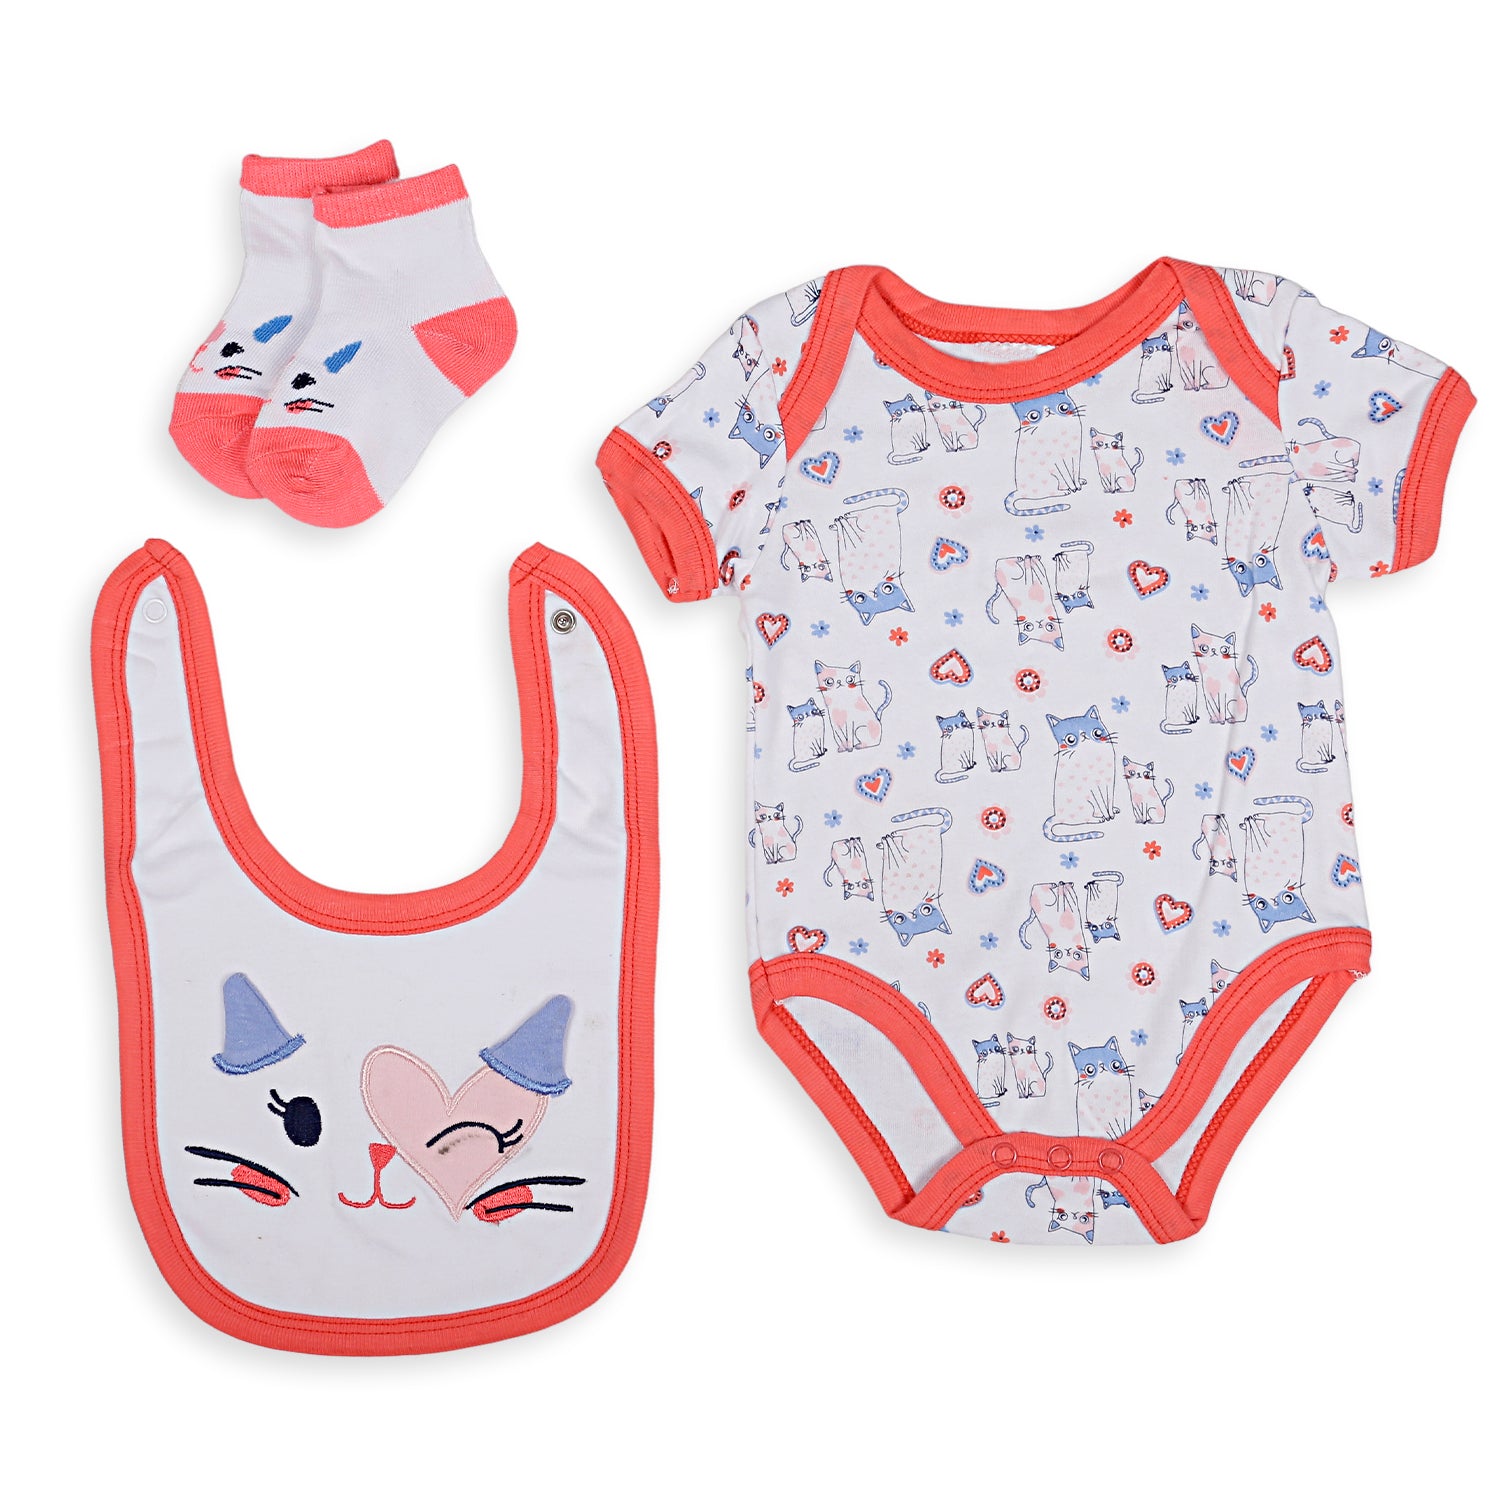 Gift Set Of 5 Bib Body Suits Pant And Socks Cat Multicolour - Baby Moo